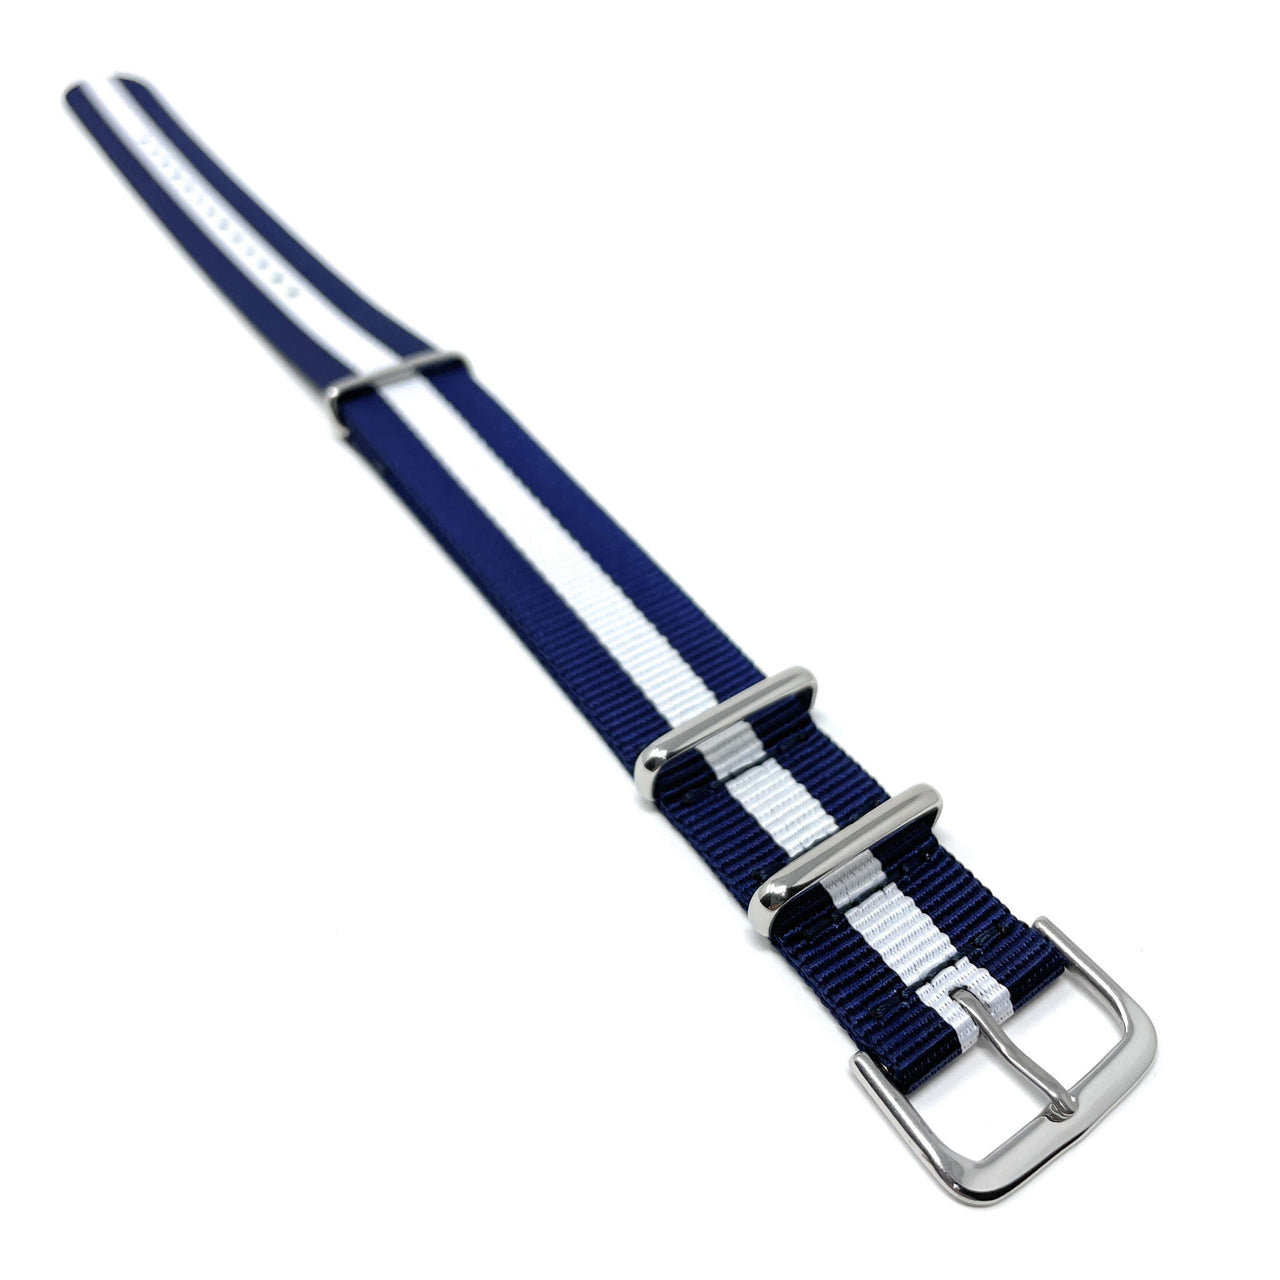 Classic Military Style Strap - Blue & White